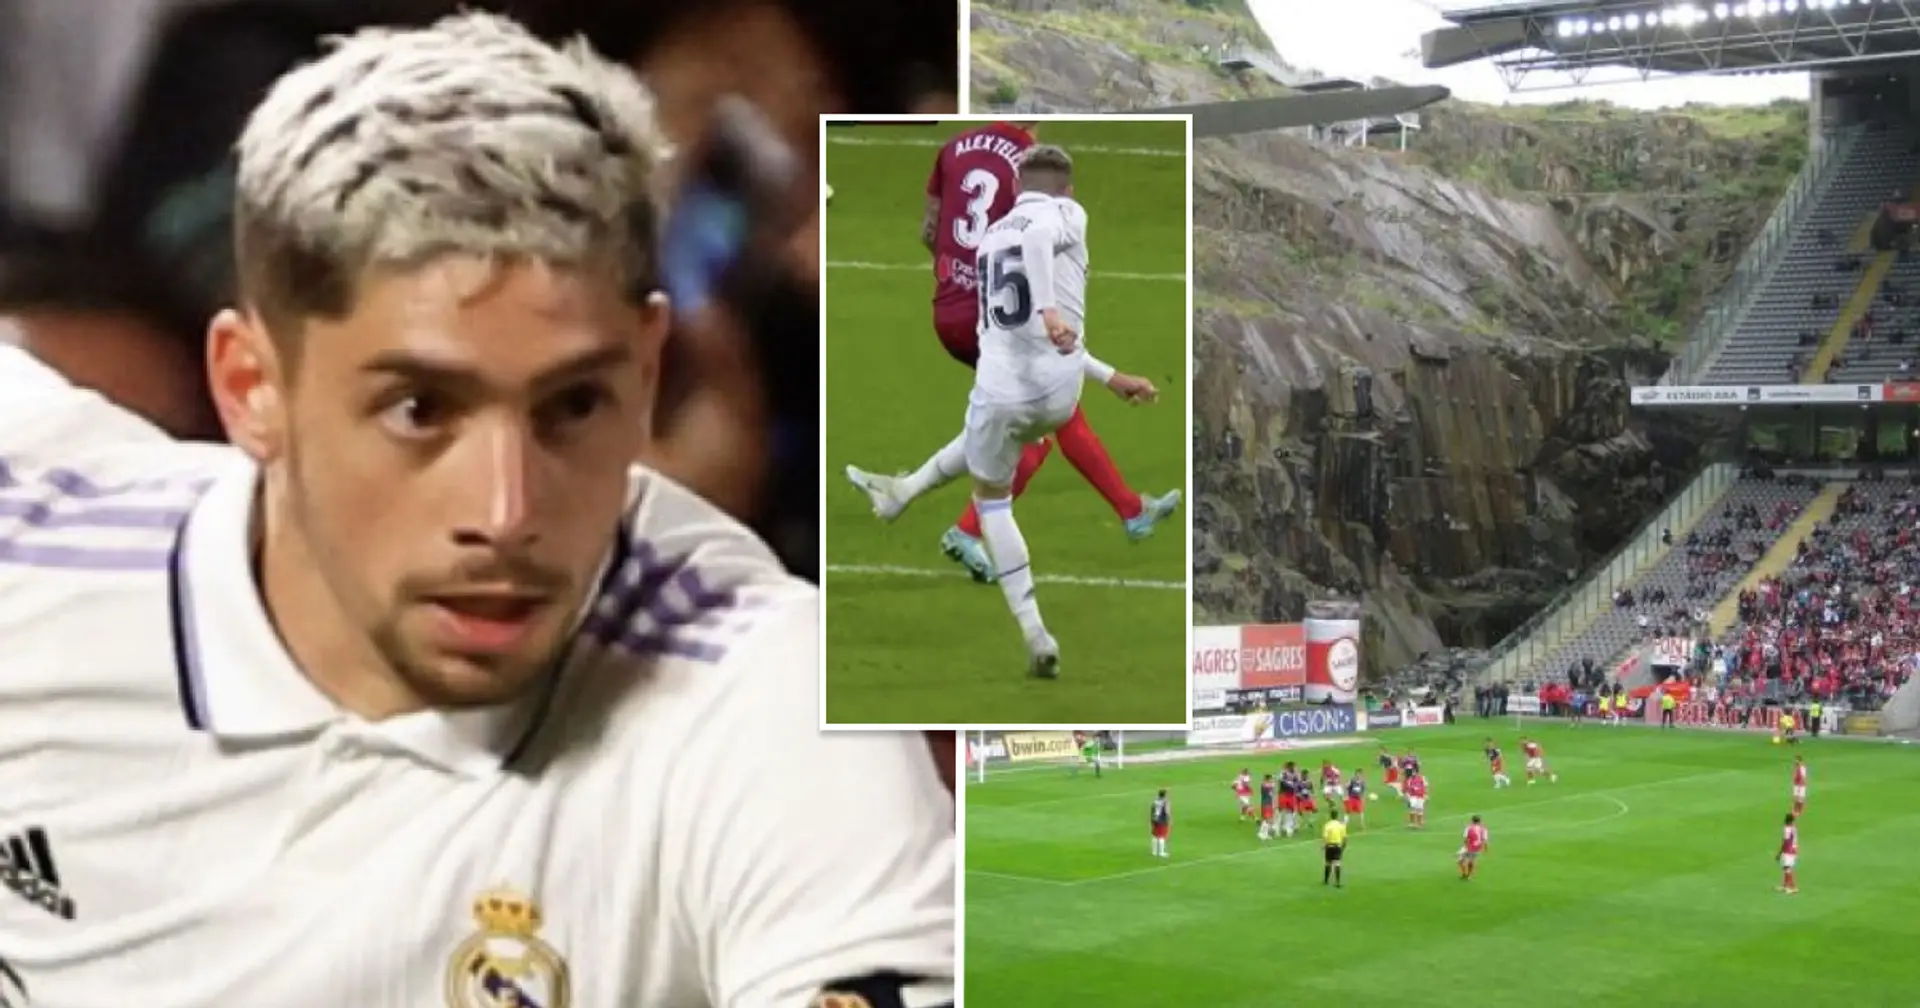 'One Valverde shot and we are having an avalanche': Real Madrid to play Braga at unique stadium carved into rock